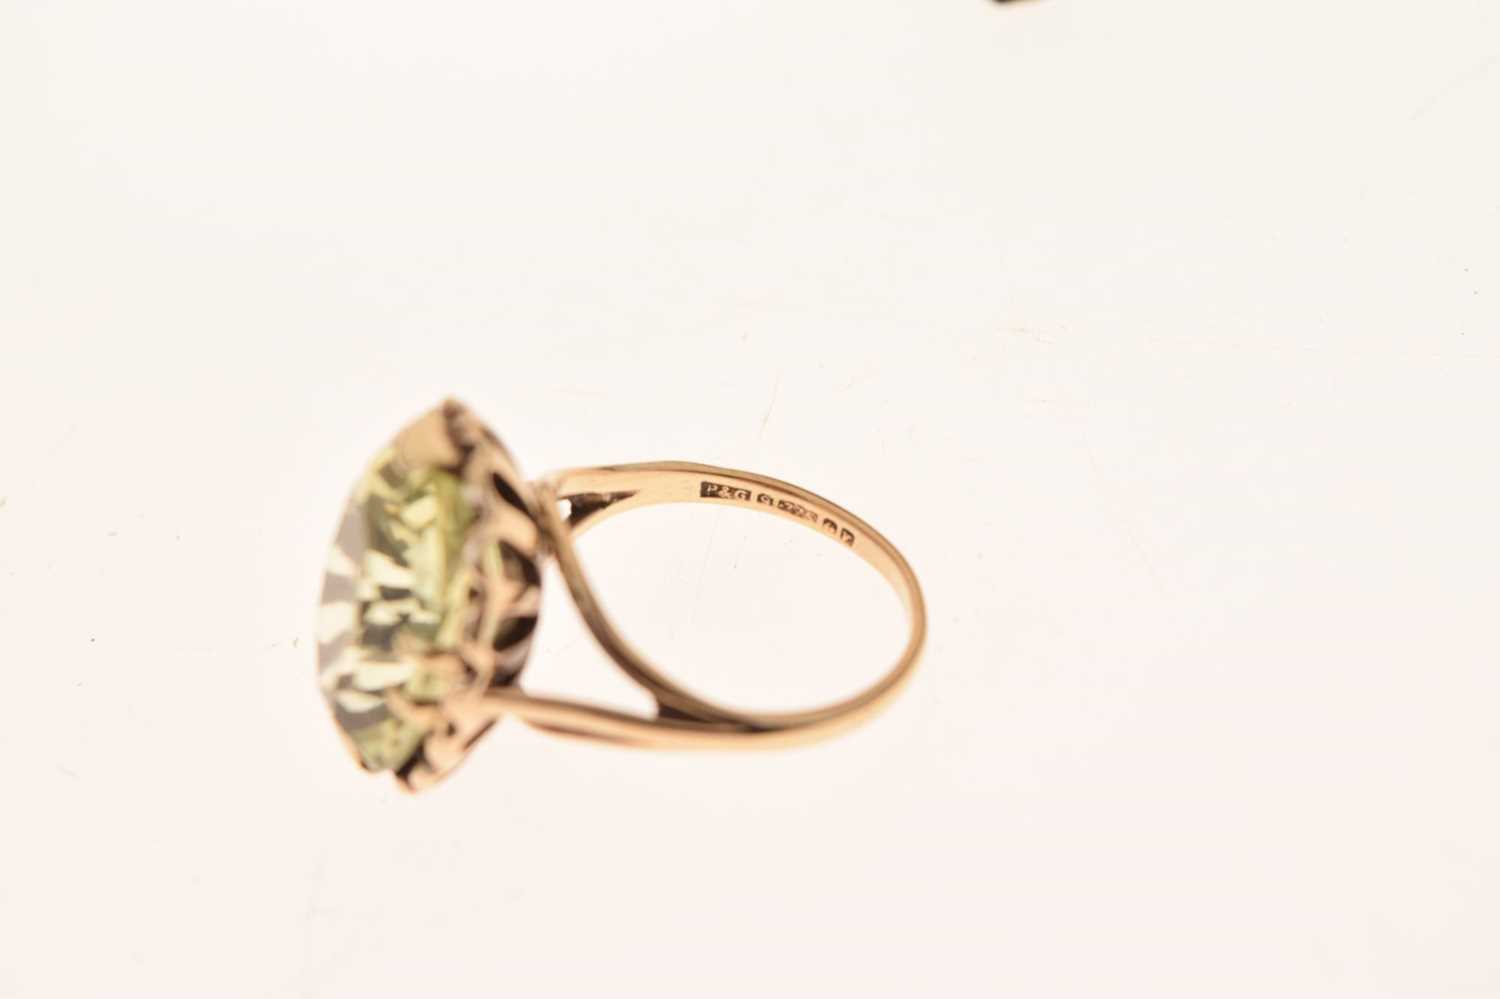 Two 1970s period dress rings - Image 6 of 9